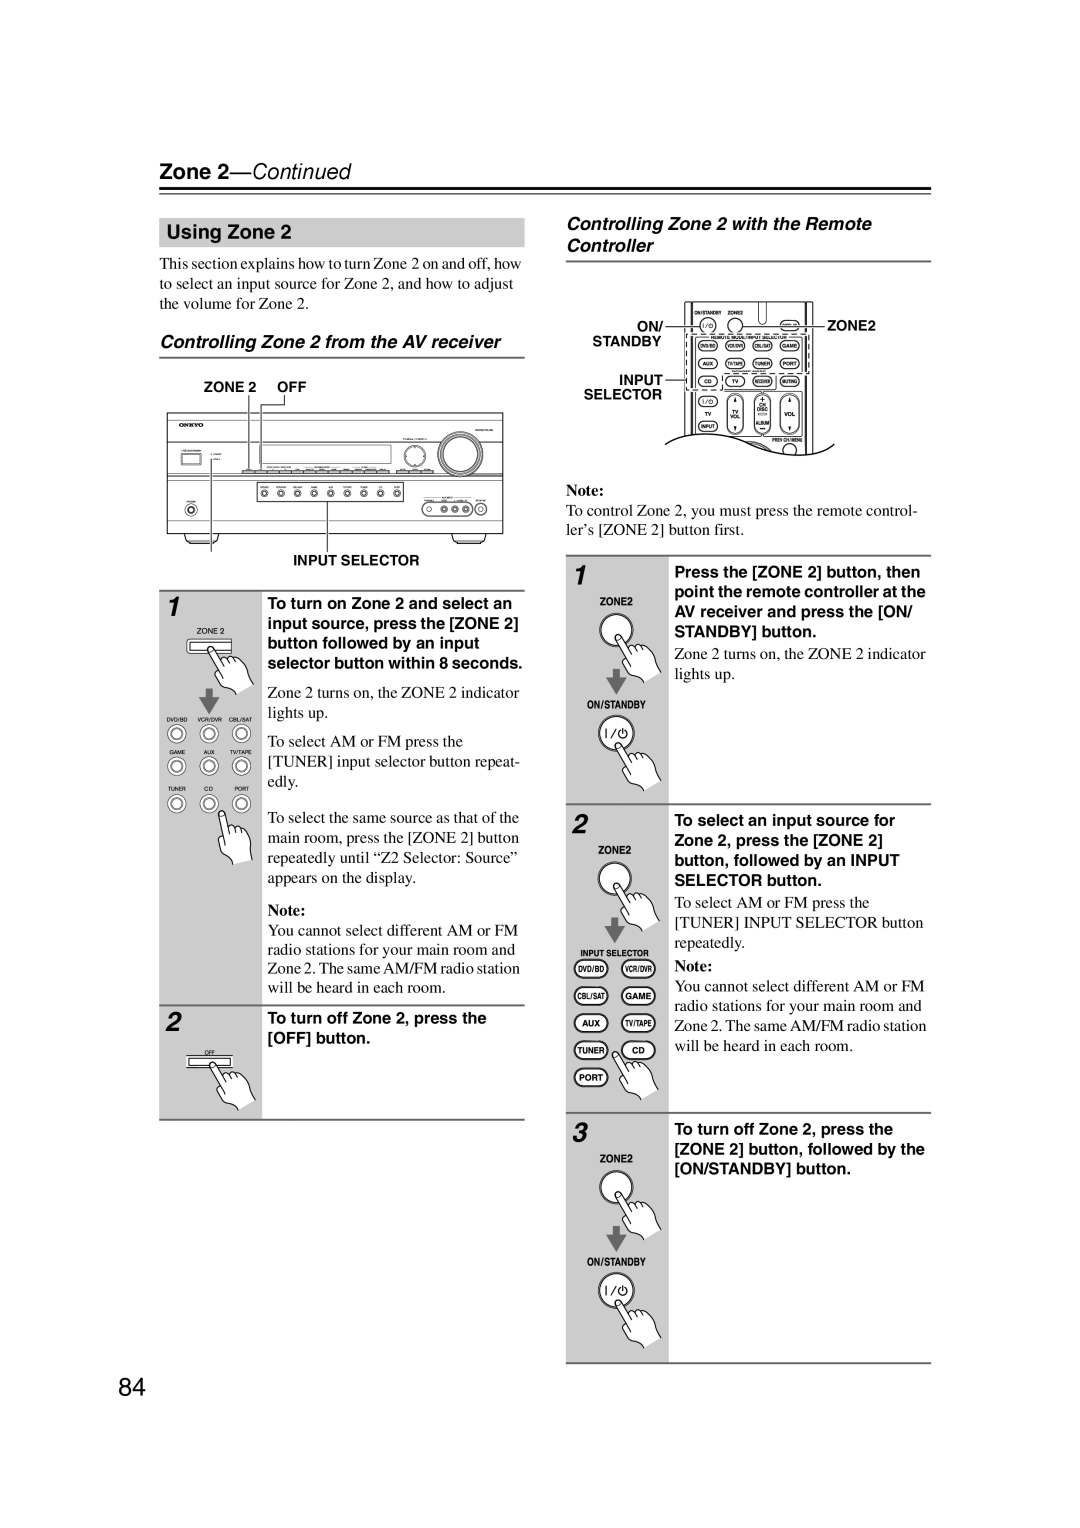 Onkyo HT-RC160 instruction manual Zone 2-Continued, Using Zone, Controlling Zone 2 from the AV receiver, lights up 